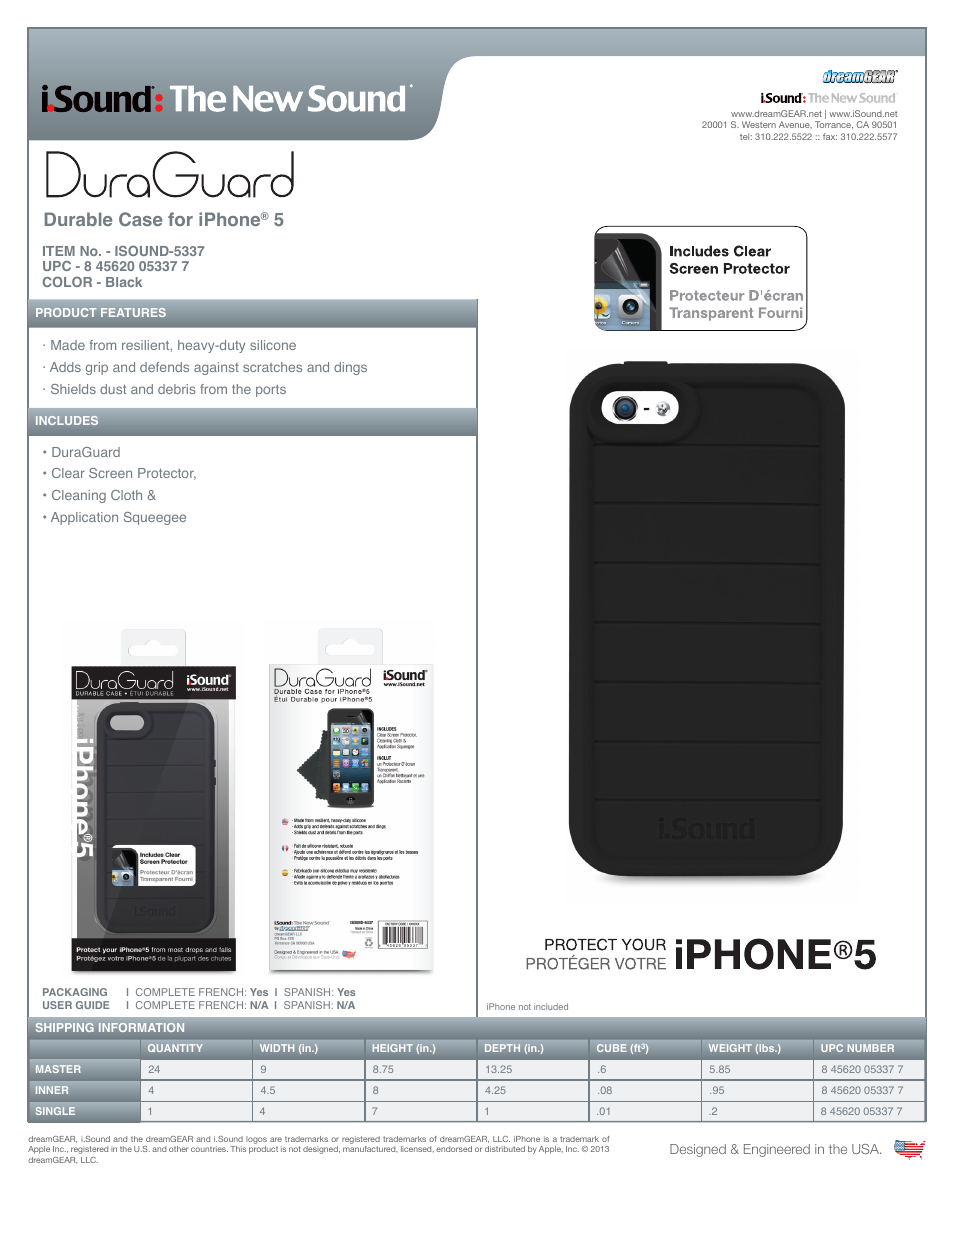 DuraGuard for iPhone5s + Screen Protector - Sell Sheet